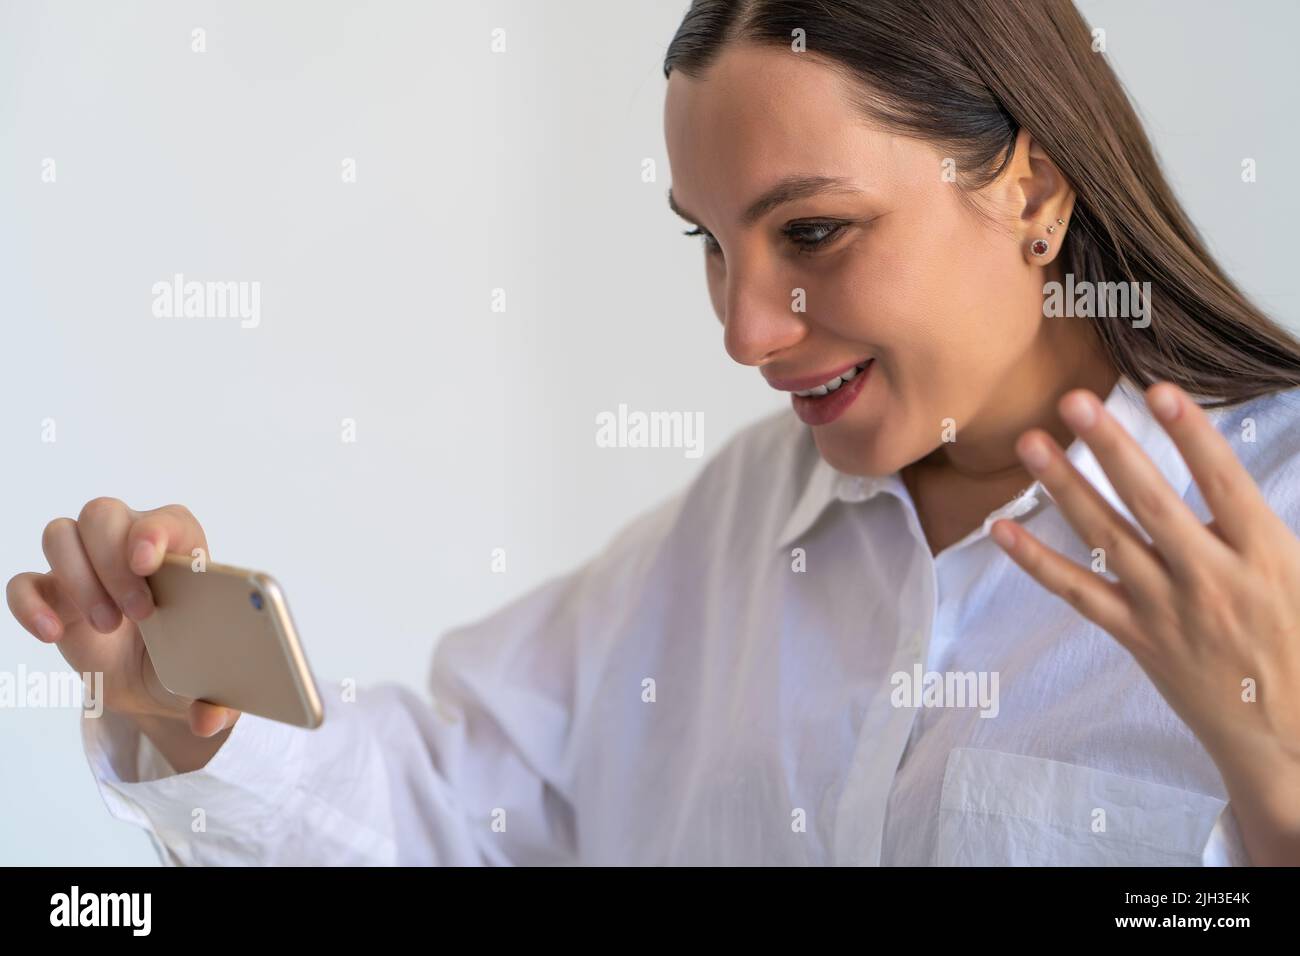 Young brunette woman emotionally talk on video call holding smartphone in hand. Stock Photo